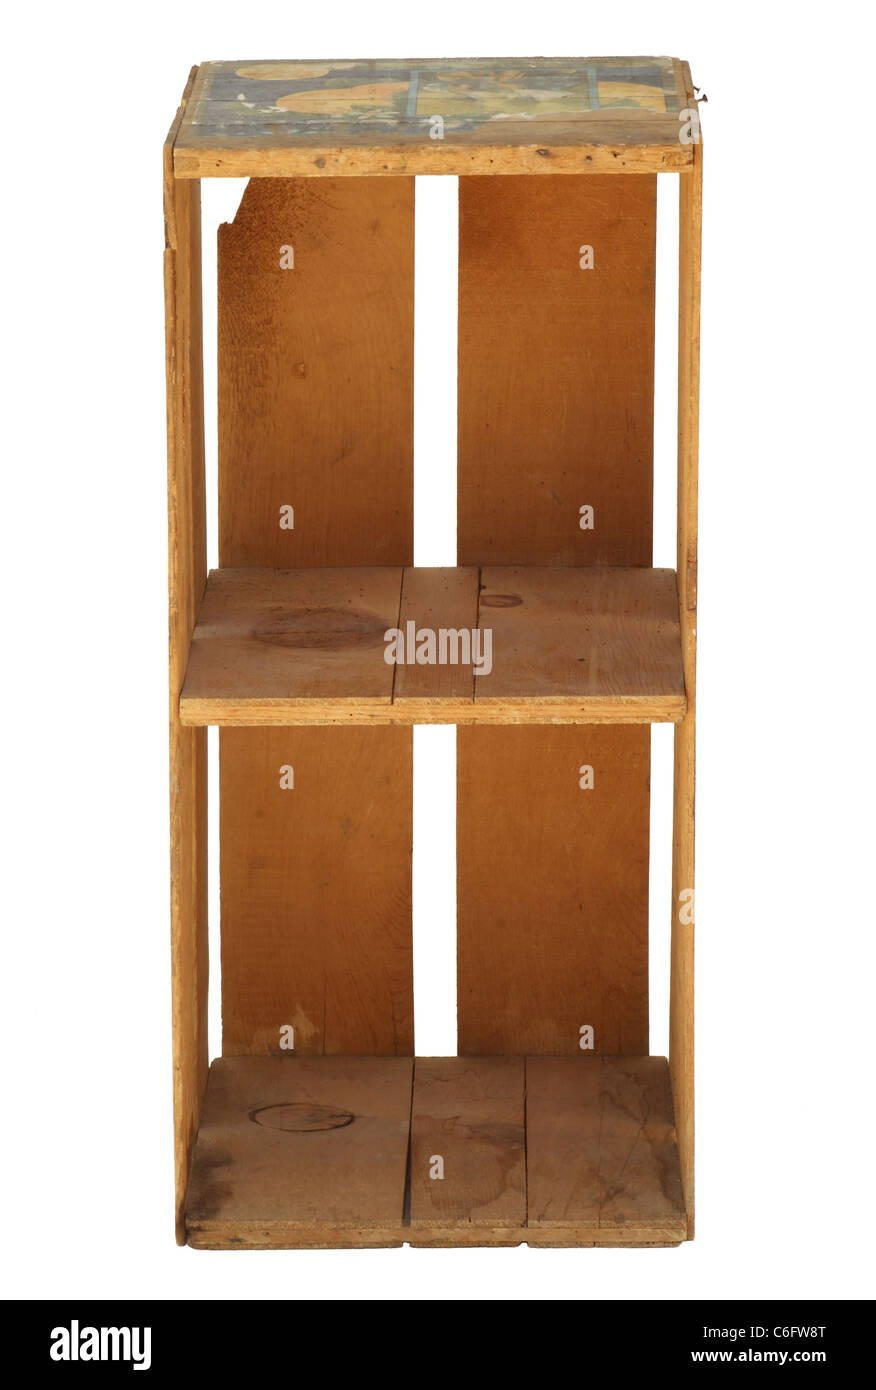 Isolated old wood upright orange fruit crate with a divider making 2 shelves. Stock Photo